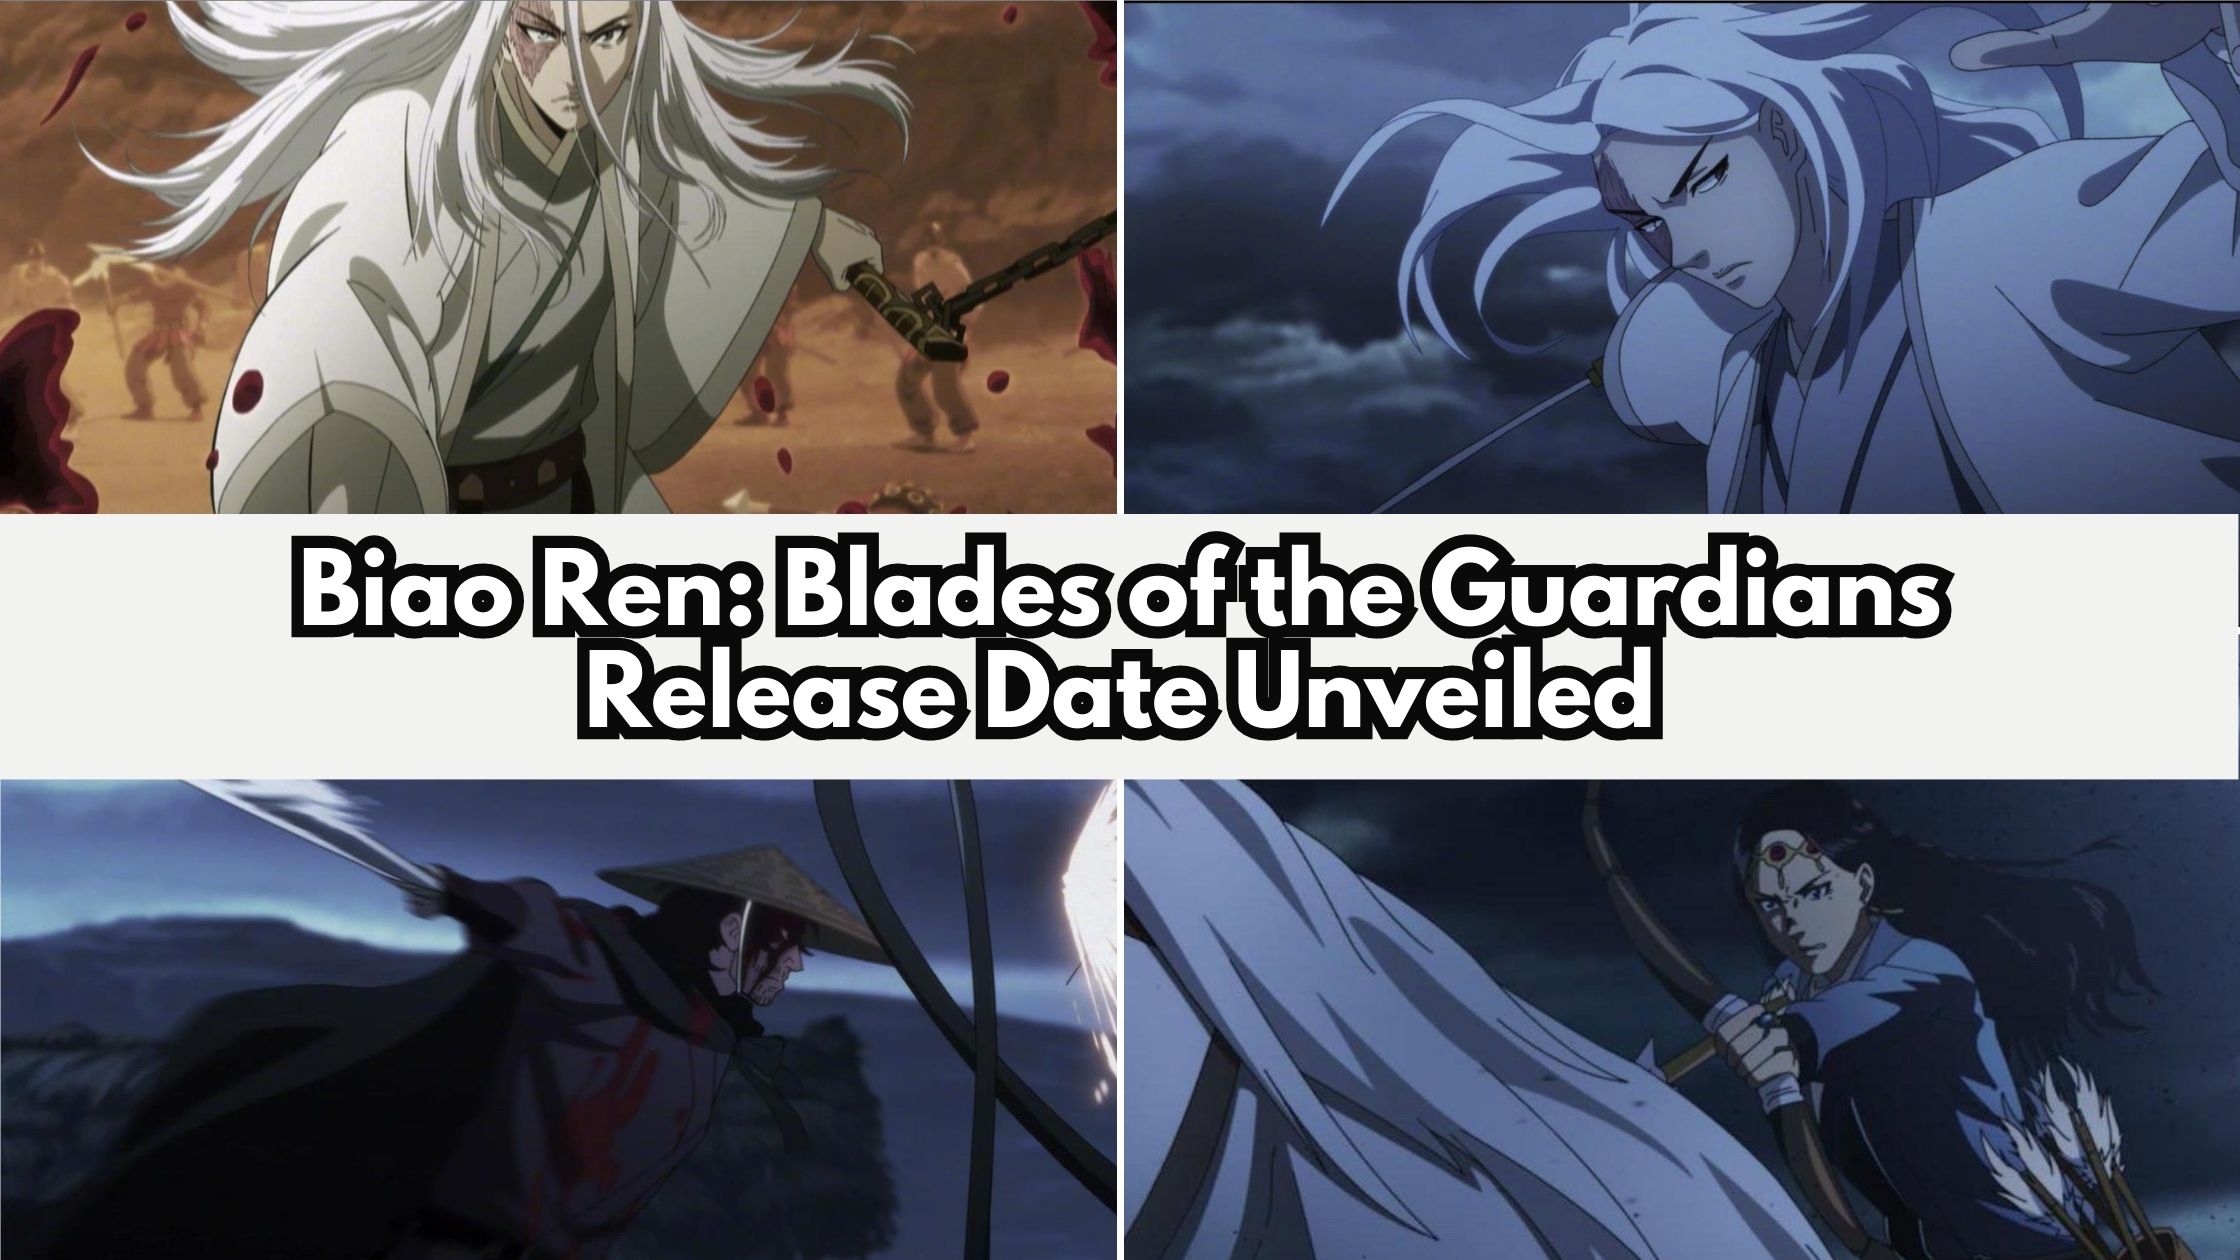 Blades of the Guardians (Biao Ren) - Ghibli Community